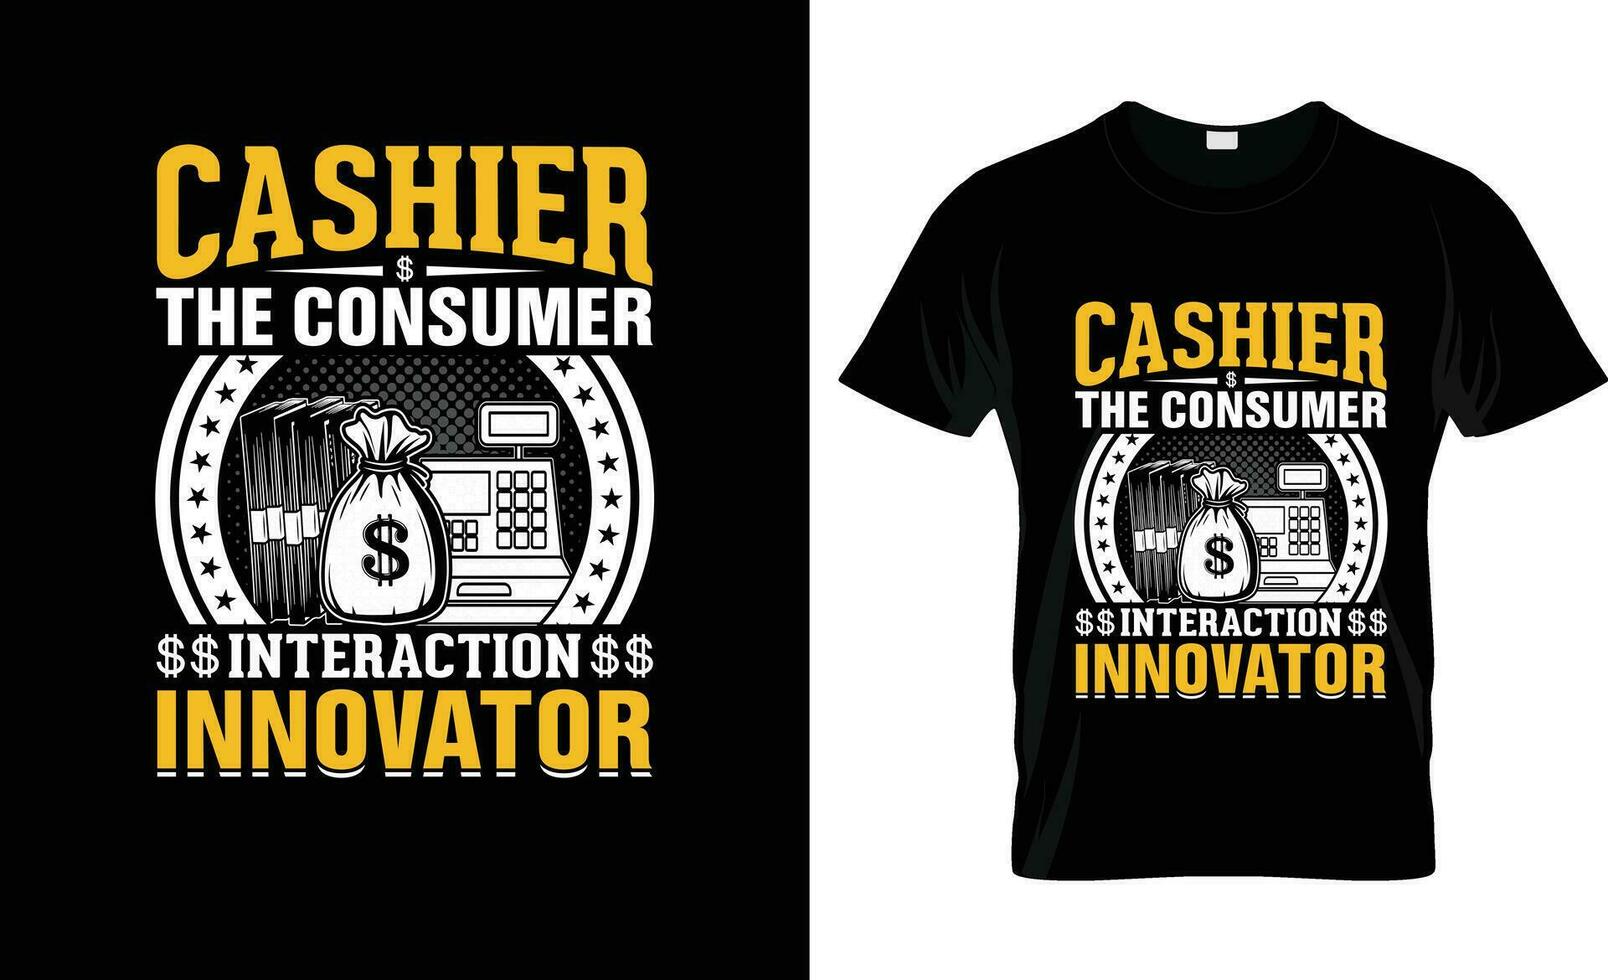 cashier the consumer interaction innovator colorful Graphic T-Shirt,  t-shirt print mockup vector